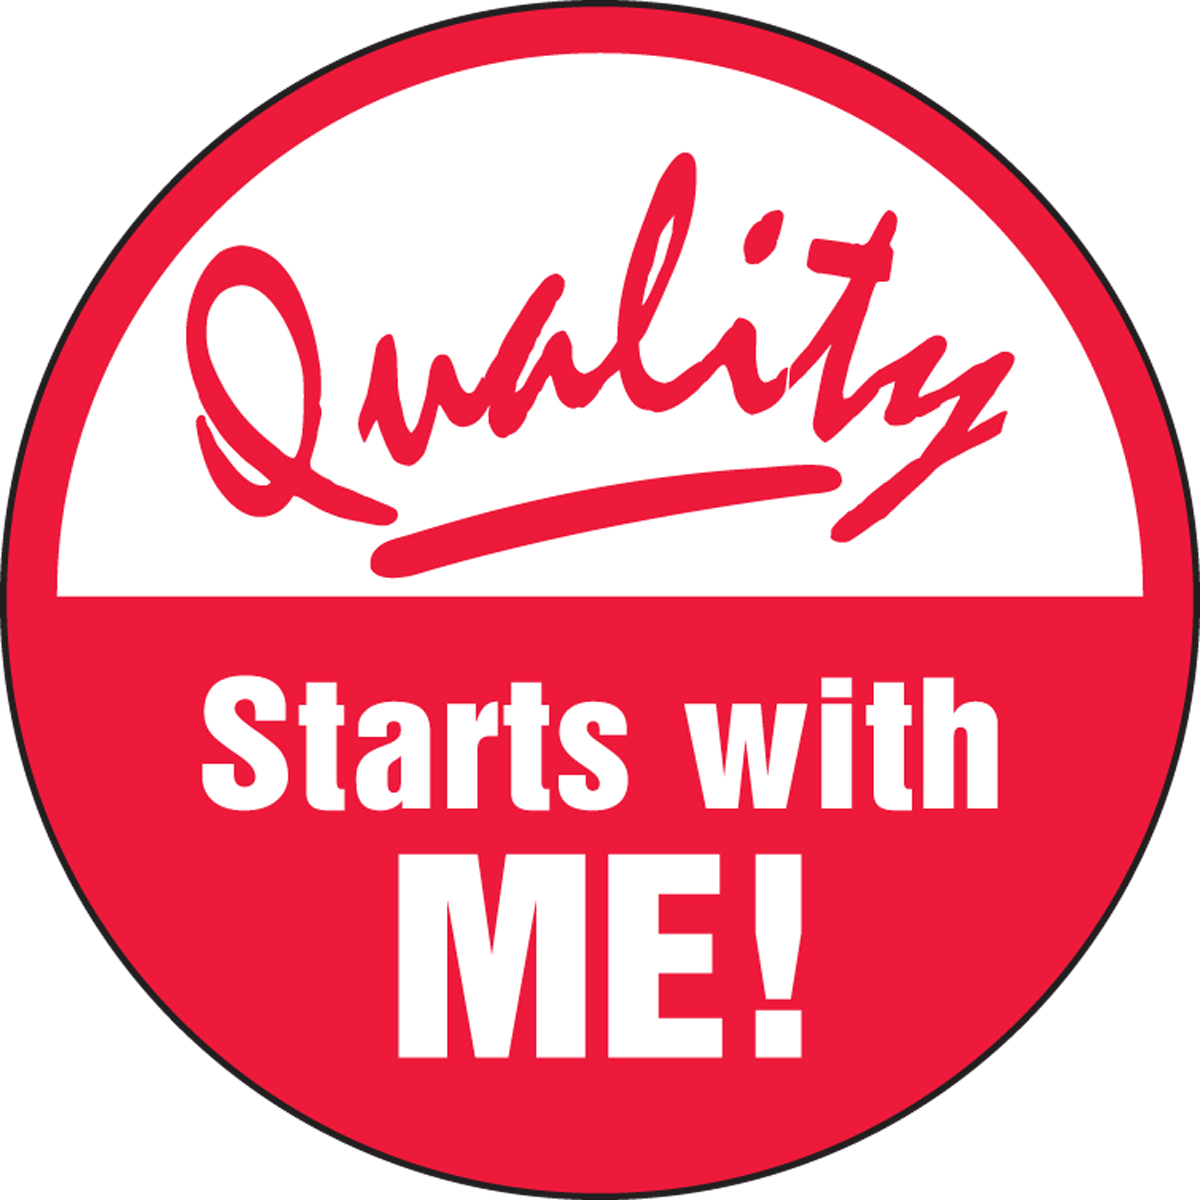 QUALITY STARTS WITH ME!